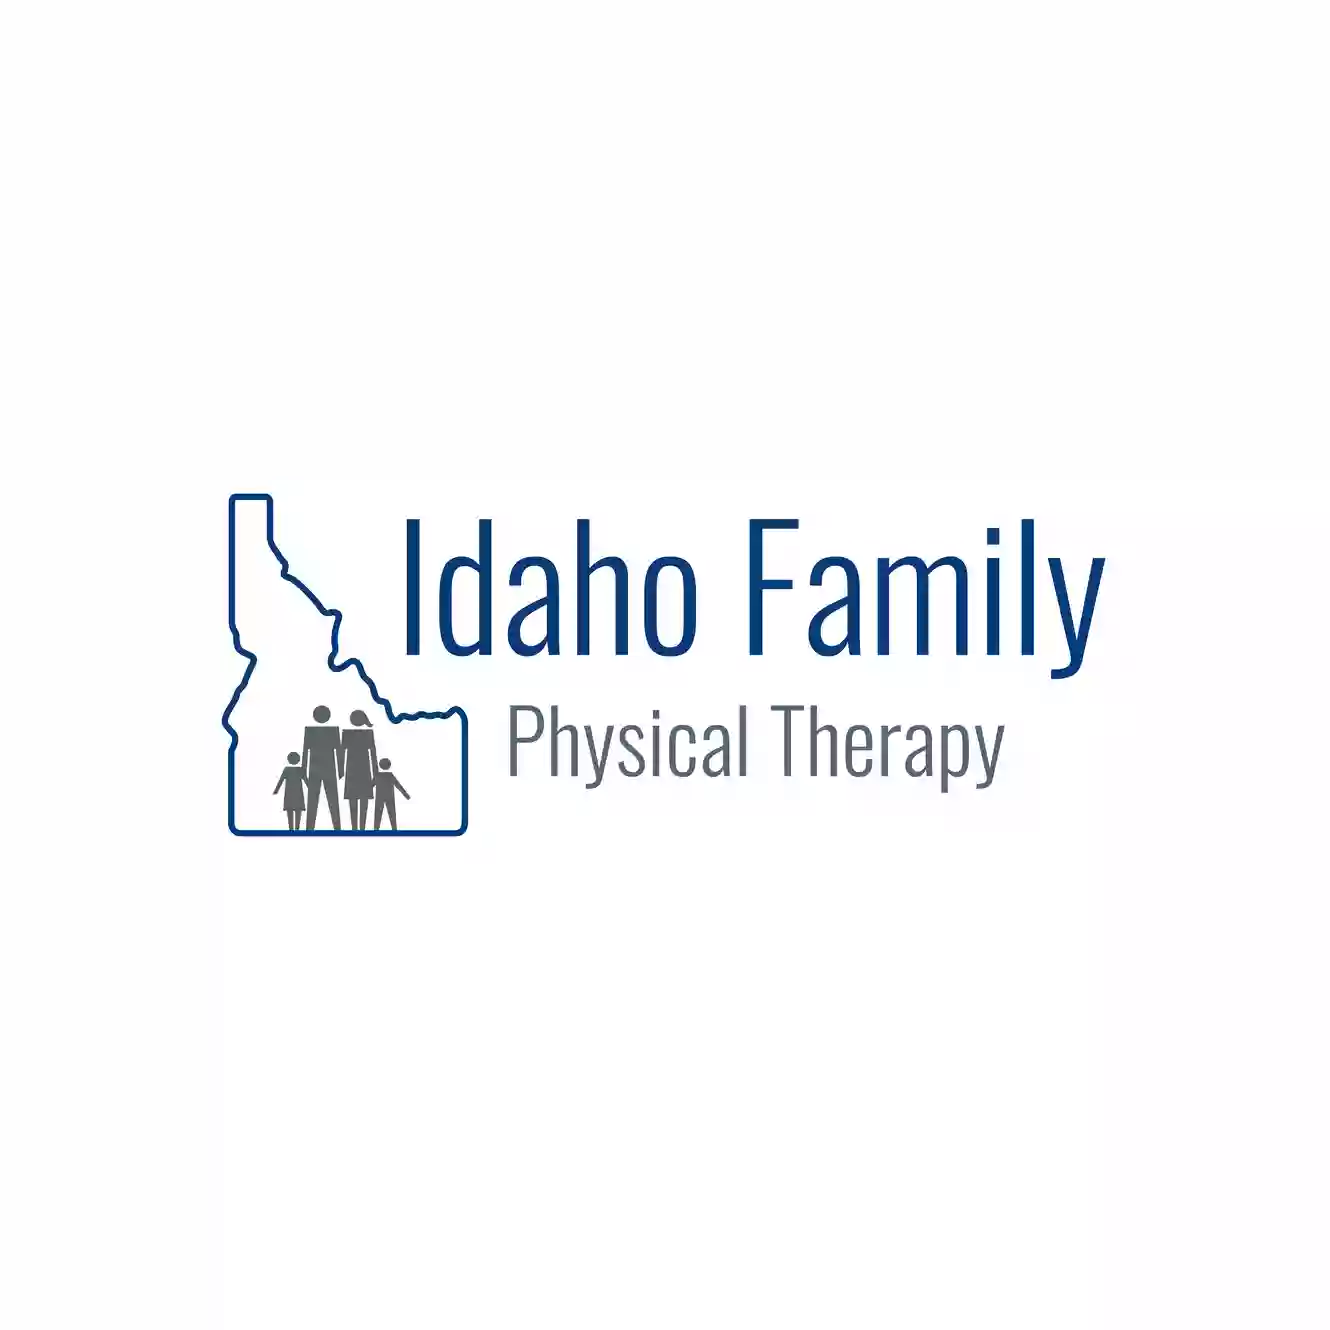 Idaho Family Physical Therapy